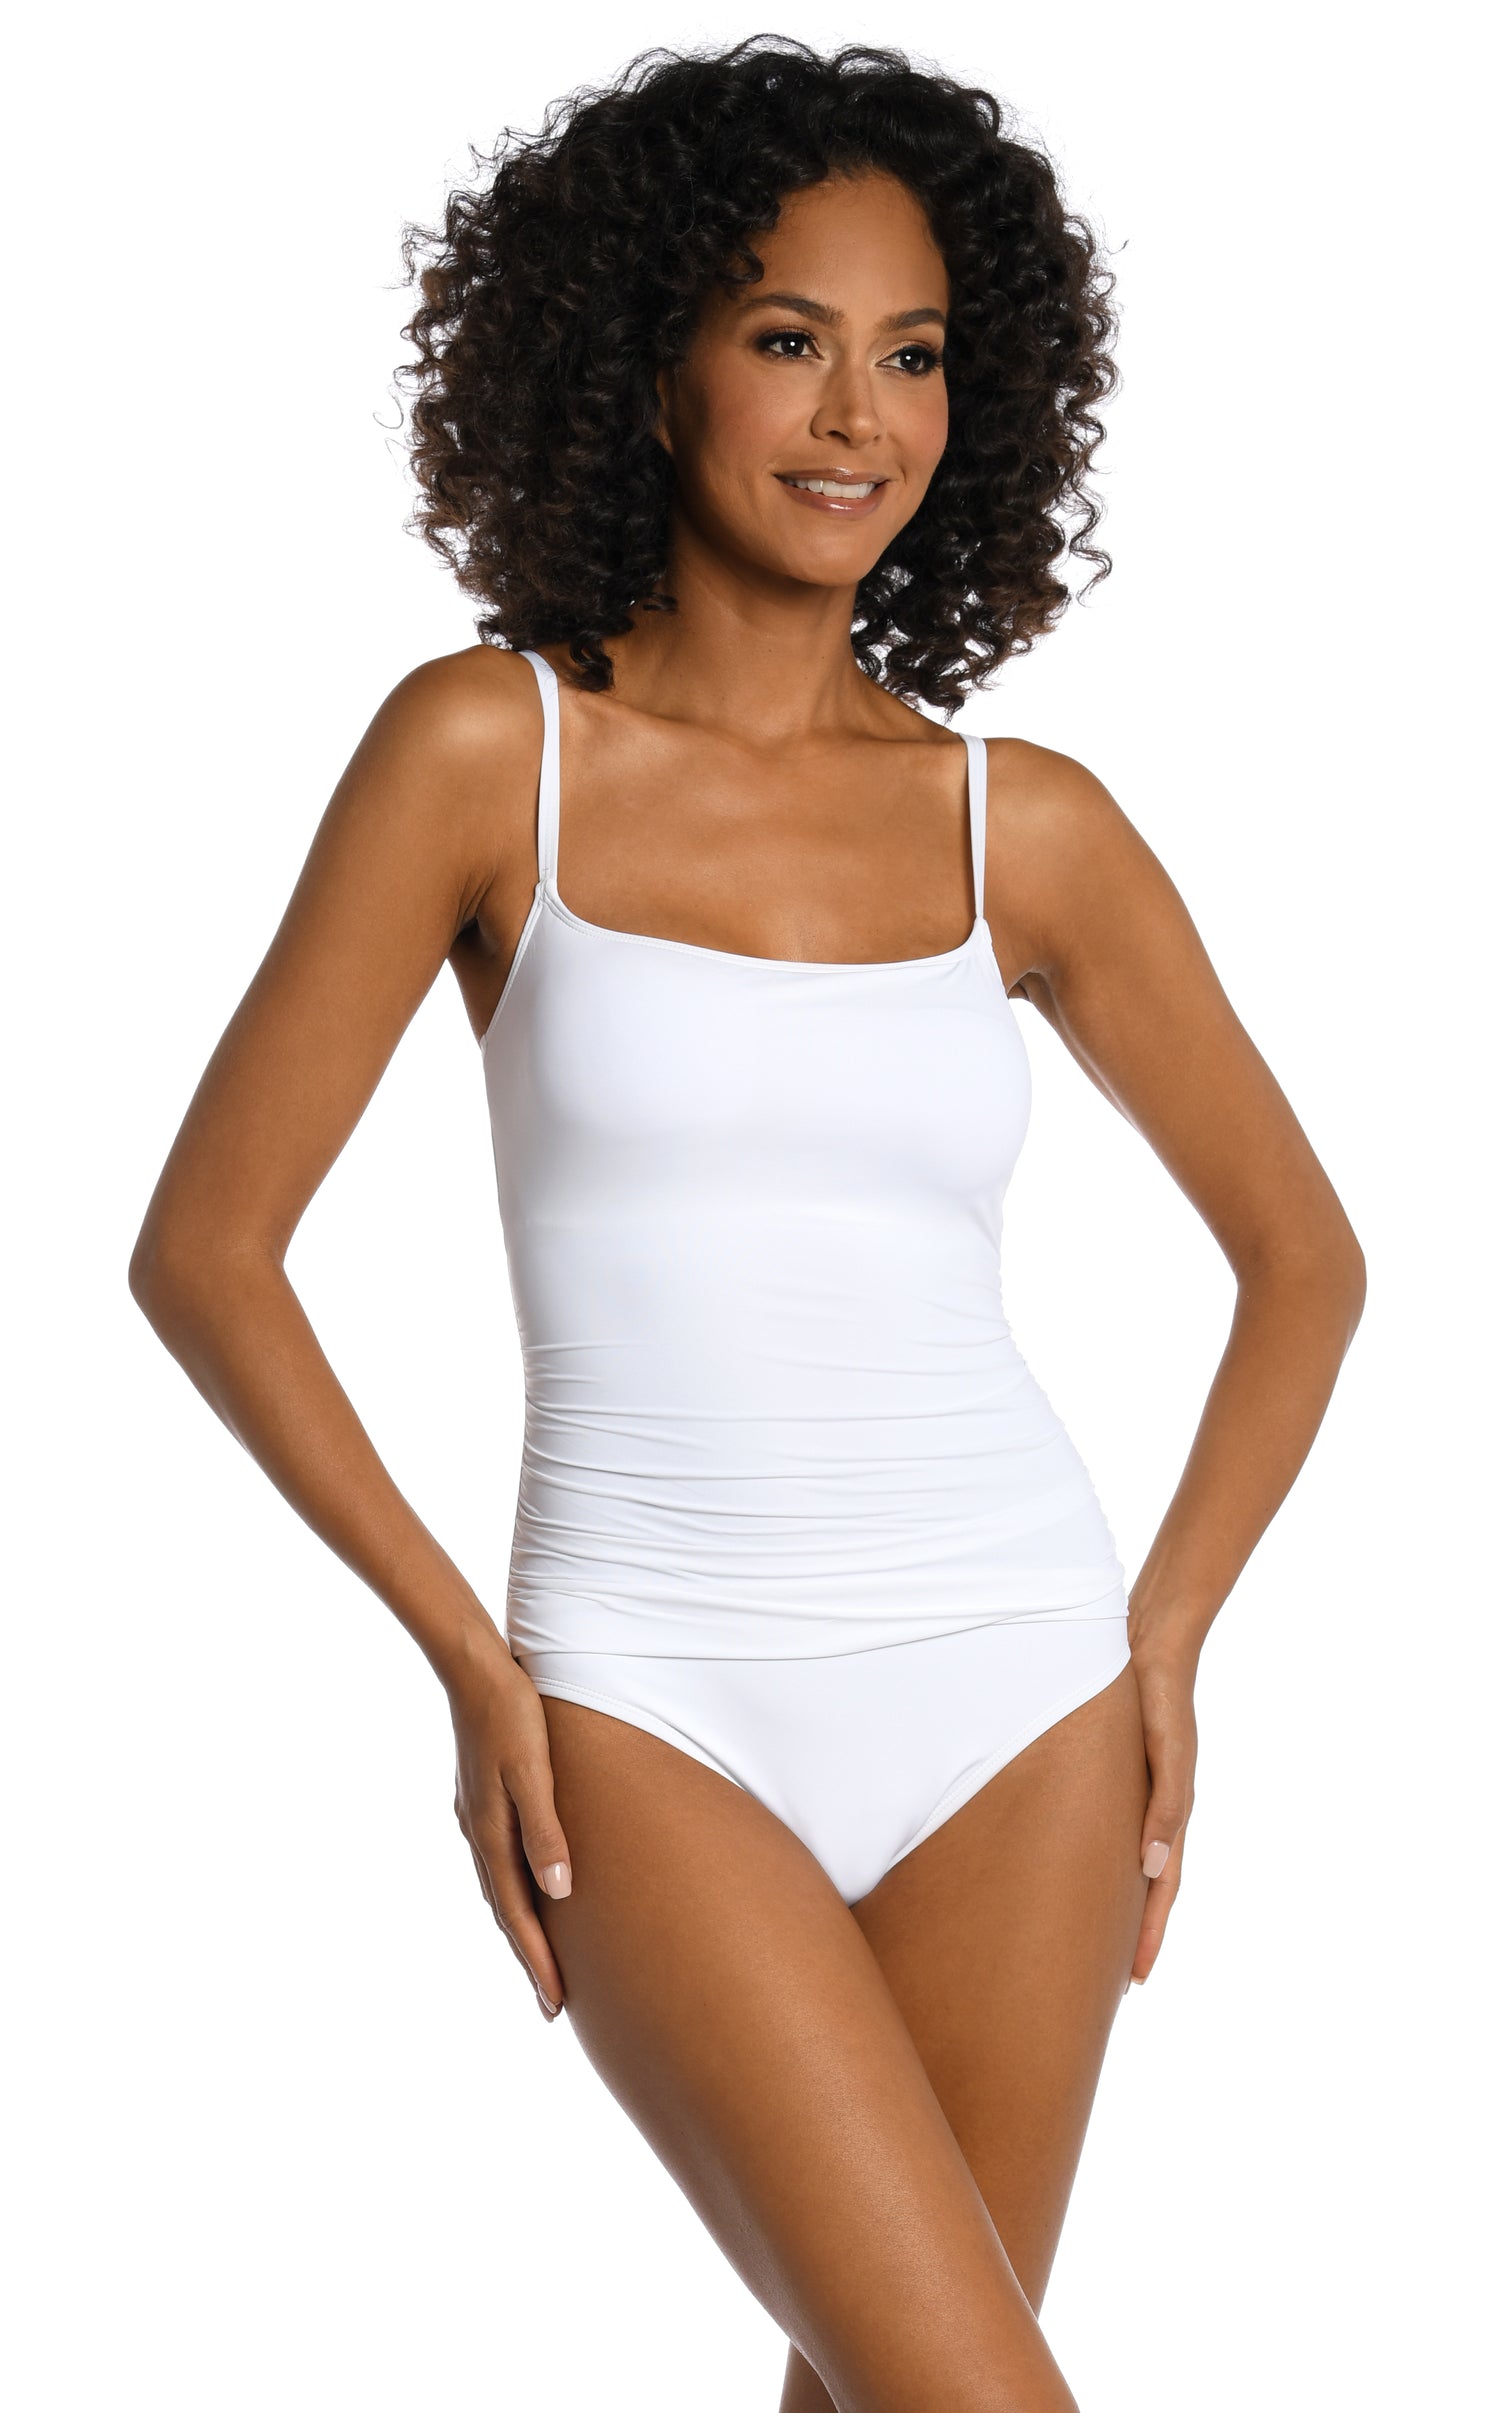 Model is wearing a white one piece swimsuit from our Best-Selling Island Goddess collection.